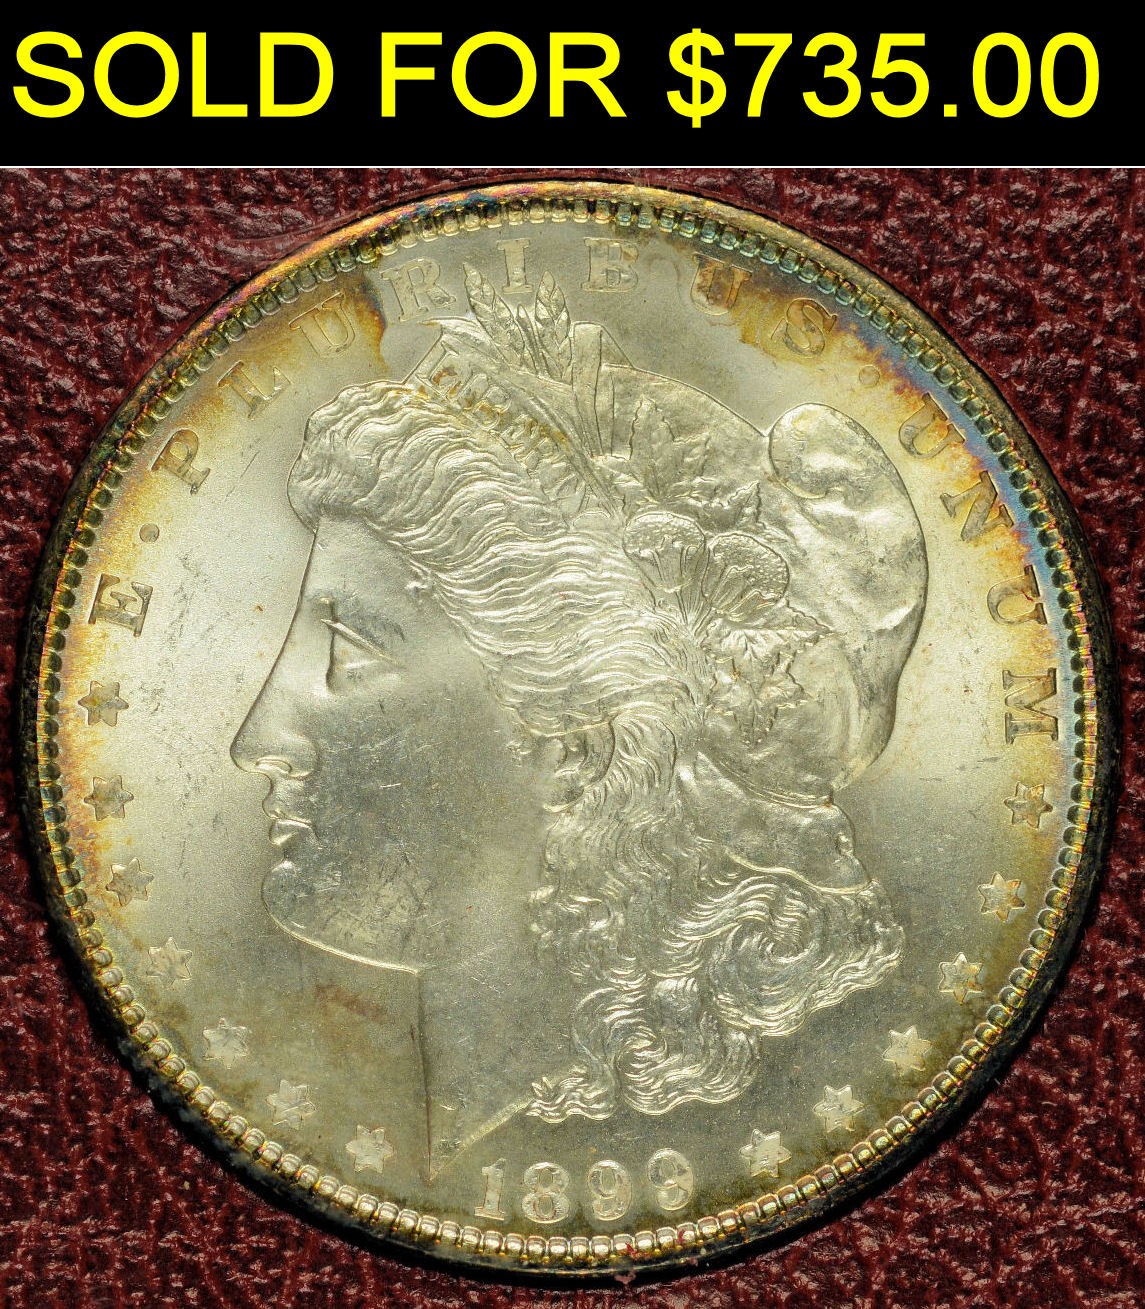 Large Public Coin Auction - 560 Lots - May 16th 2013